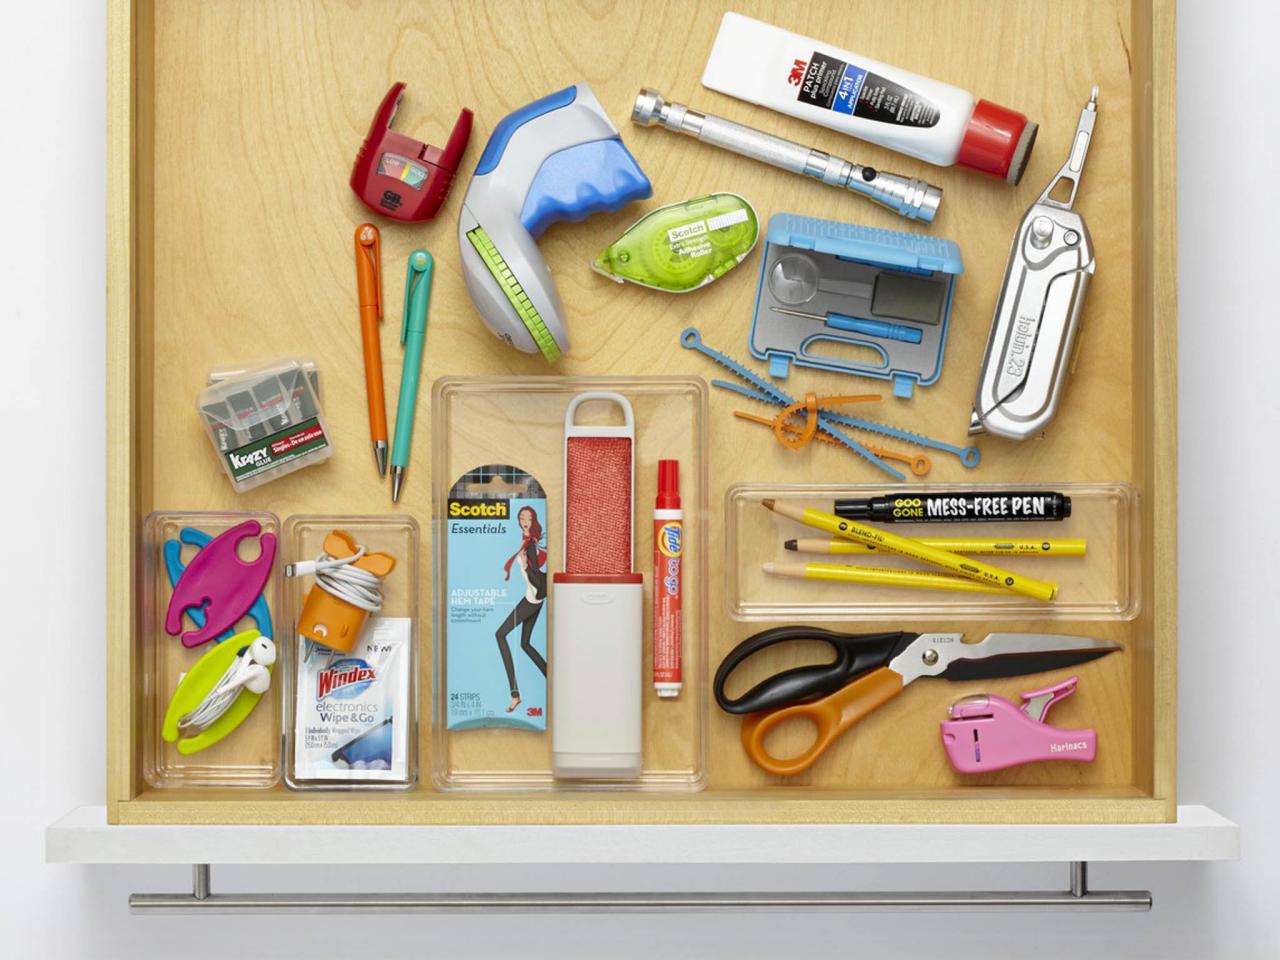 WHAT'S IN YOUR JUNK DRAWER? 5 Unexpected Items Justify My Junk Drawer's  Existence